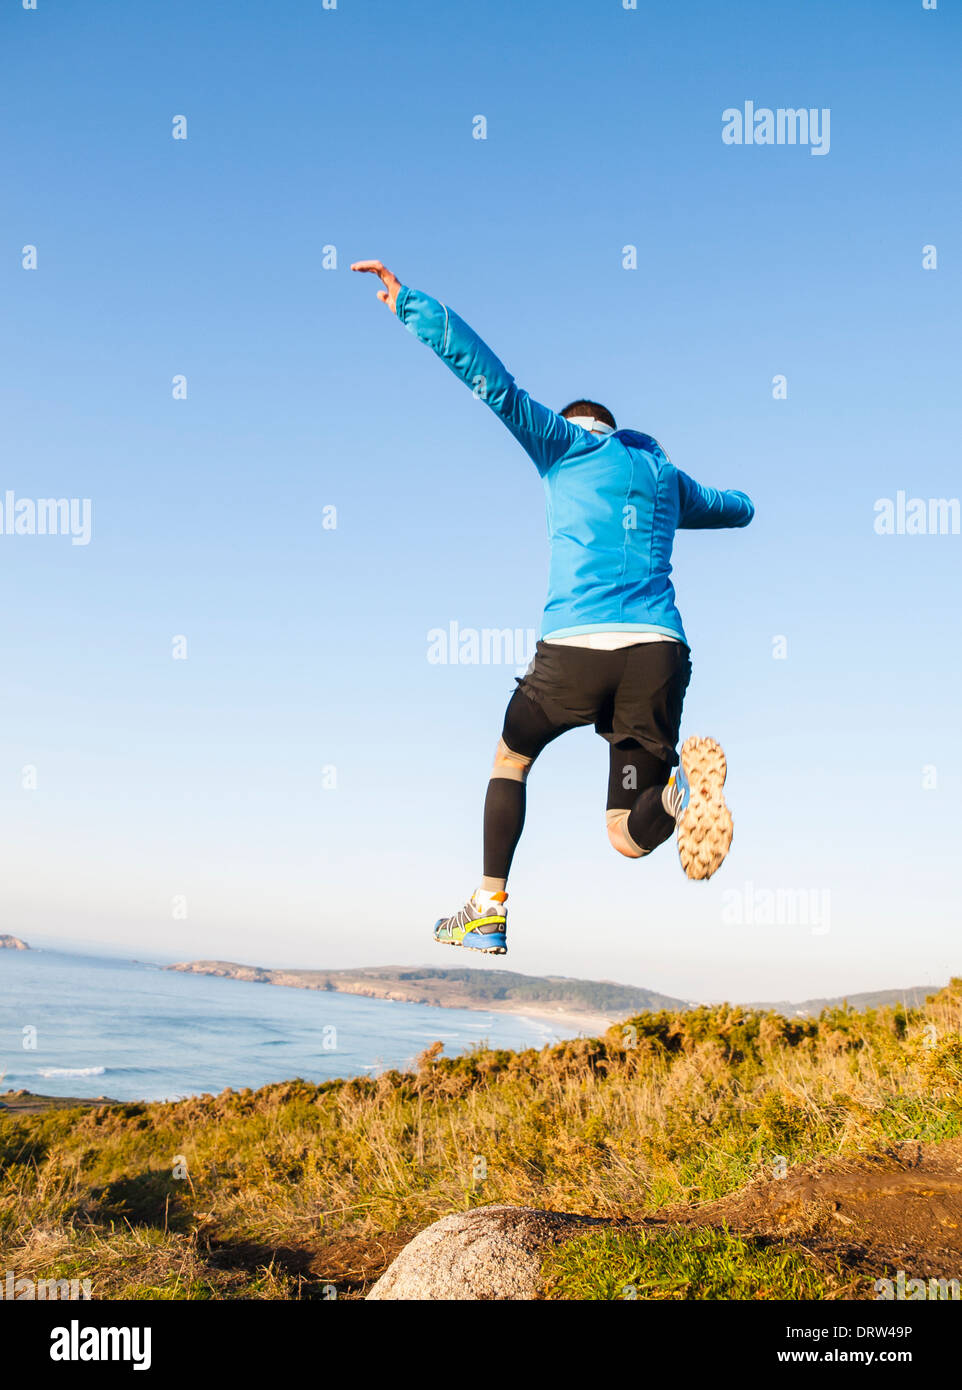 Man giving a big jump while practicing trail running with a coastal landscape in the background. Stock Photo